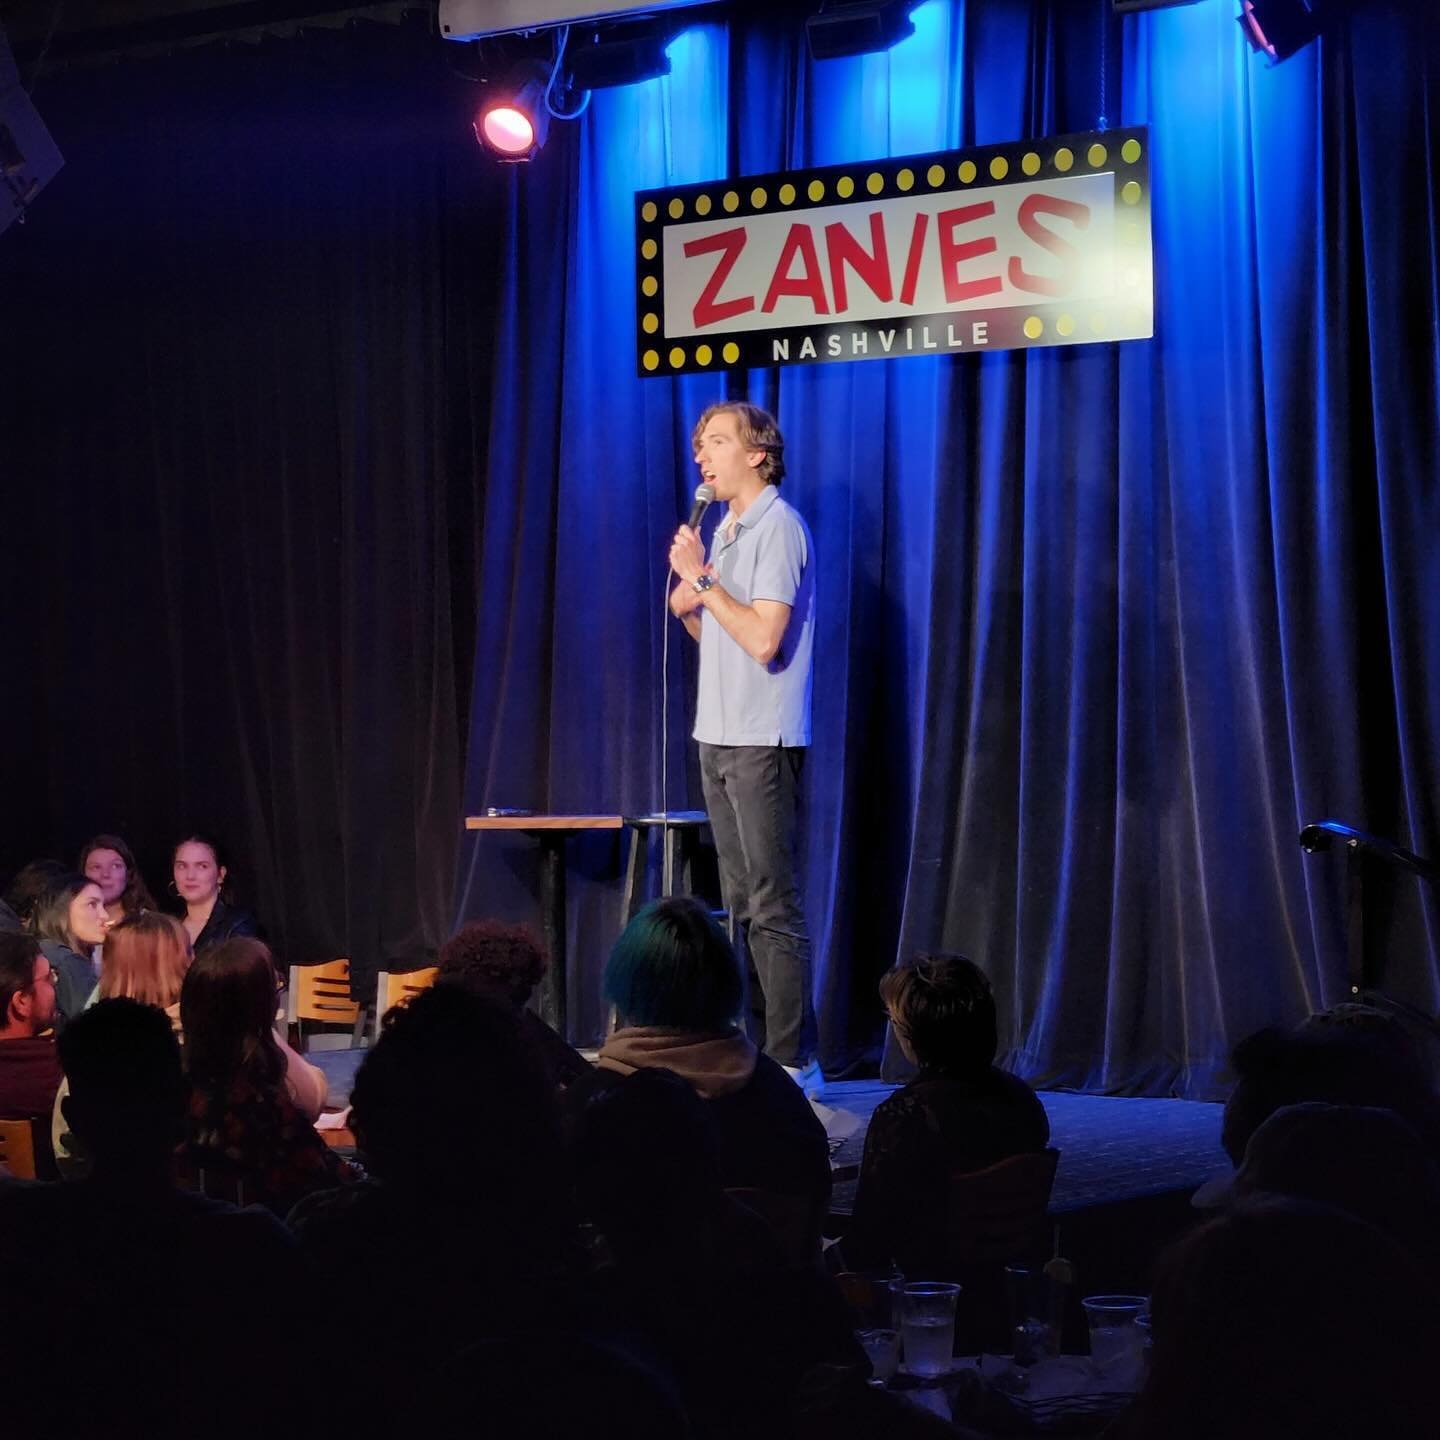 Nashville Comedy Fest was incredible. A big thank you to @zaniesnashville for putting together hands down one of the greatest comedy fests a boy could ask for. The liver damage from the open bar will guarantee I never forget it 

&bull;

I&rsquo;m in